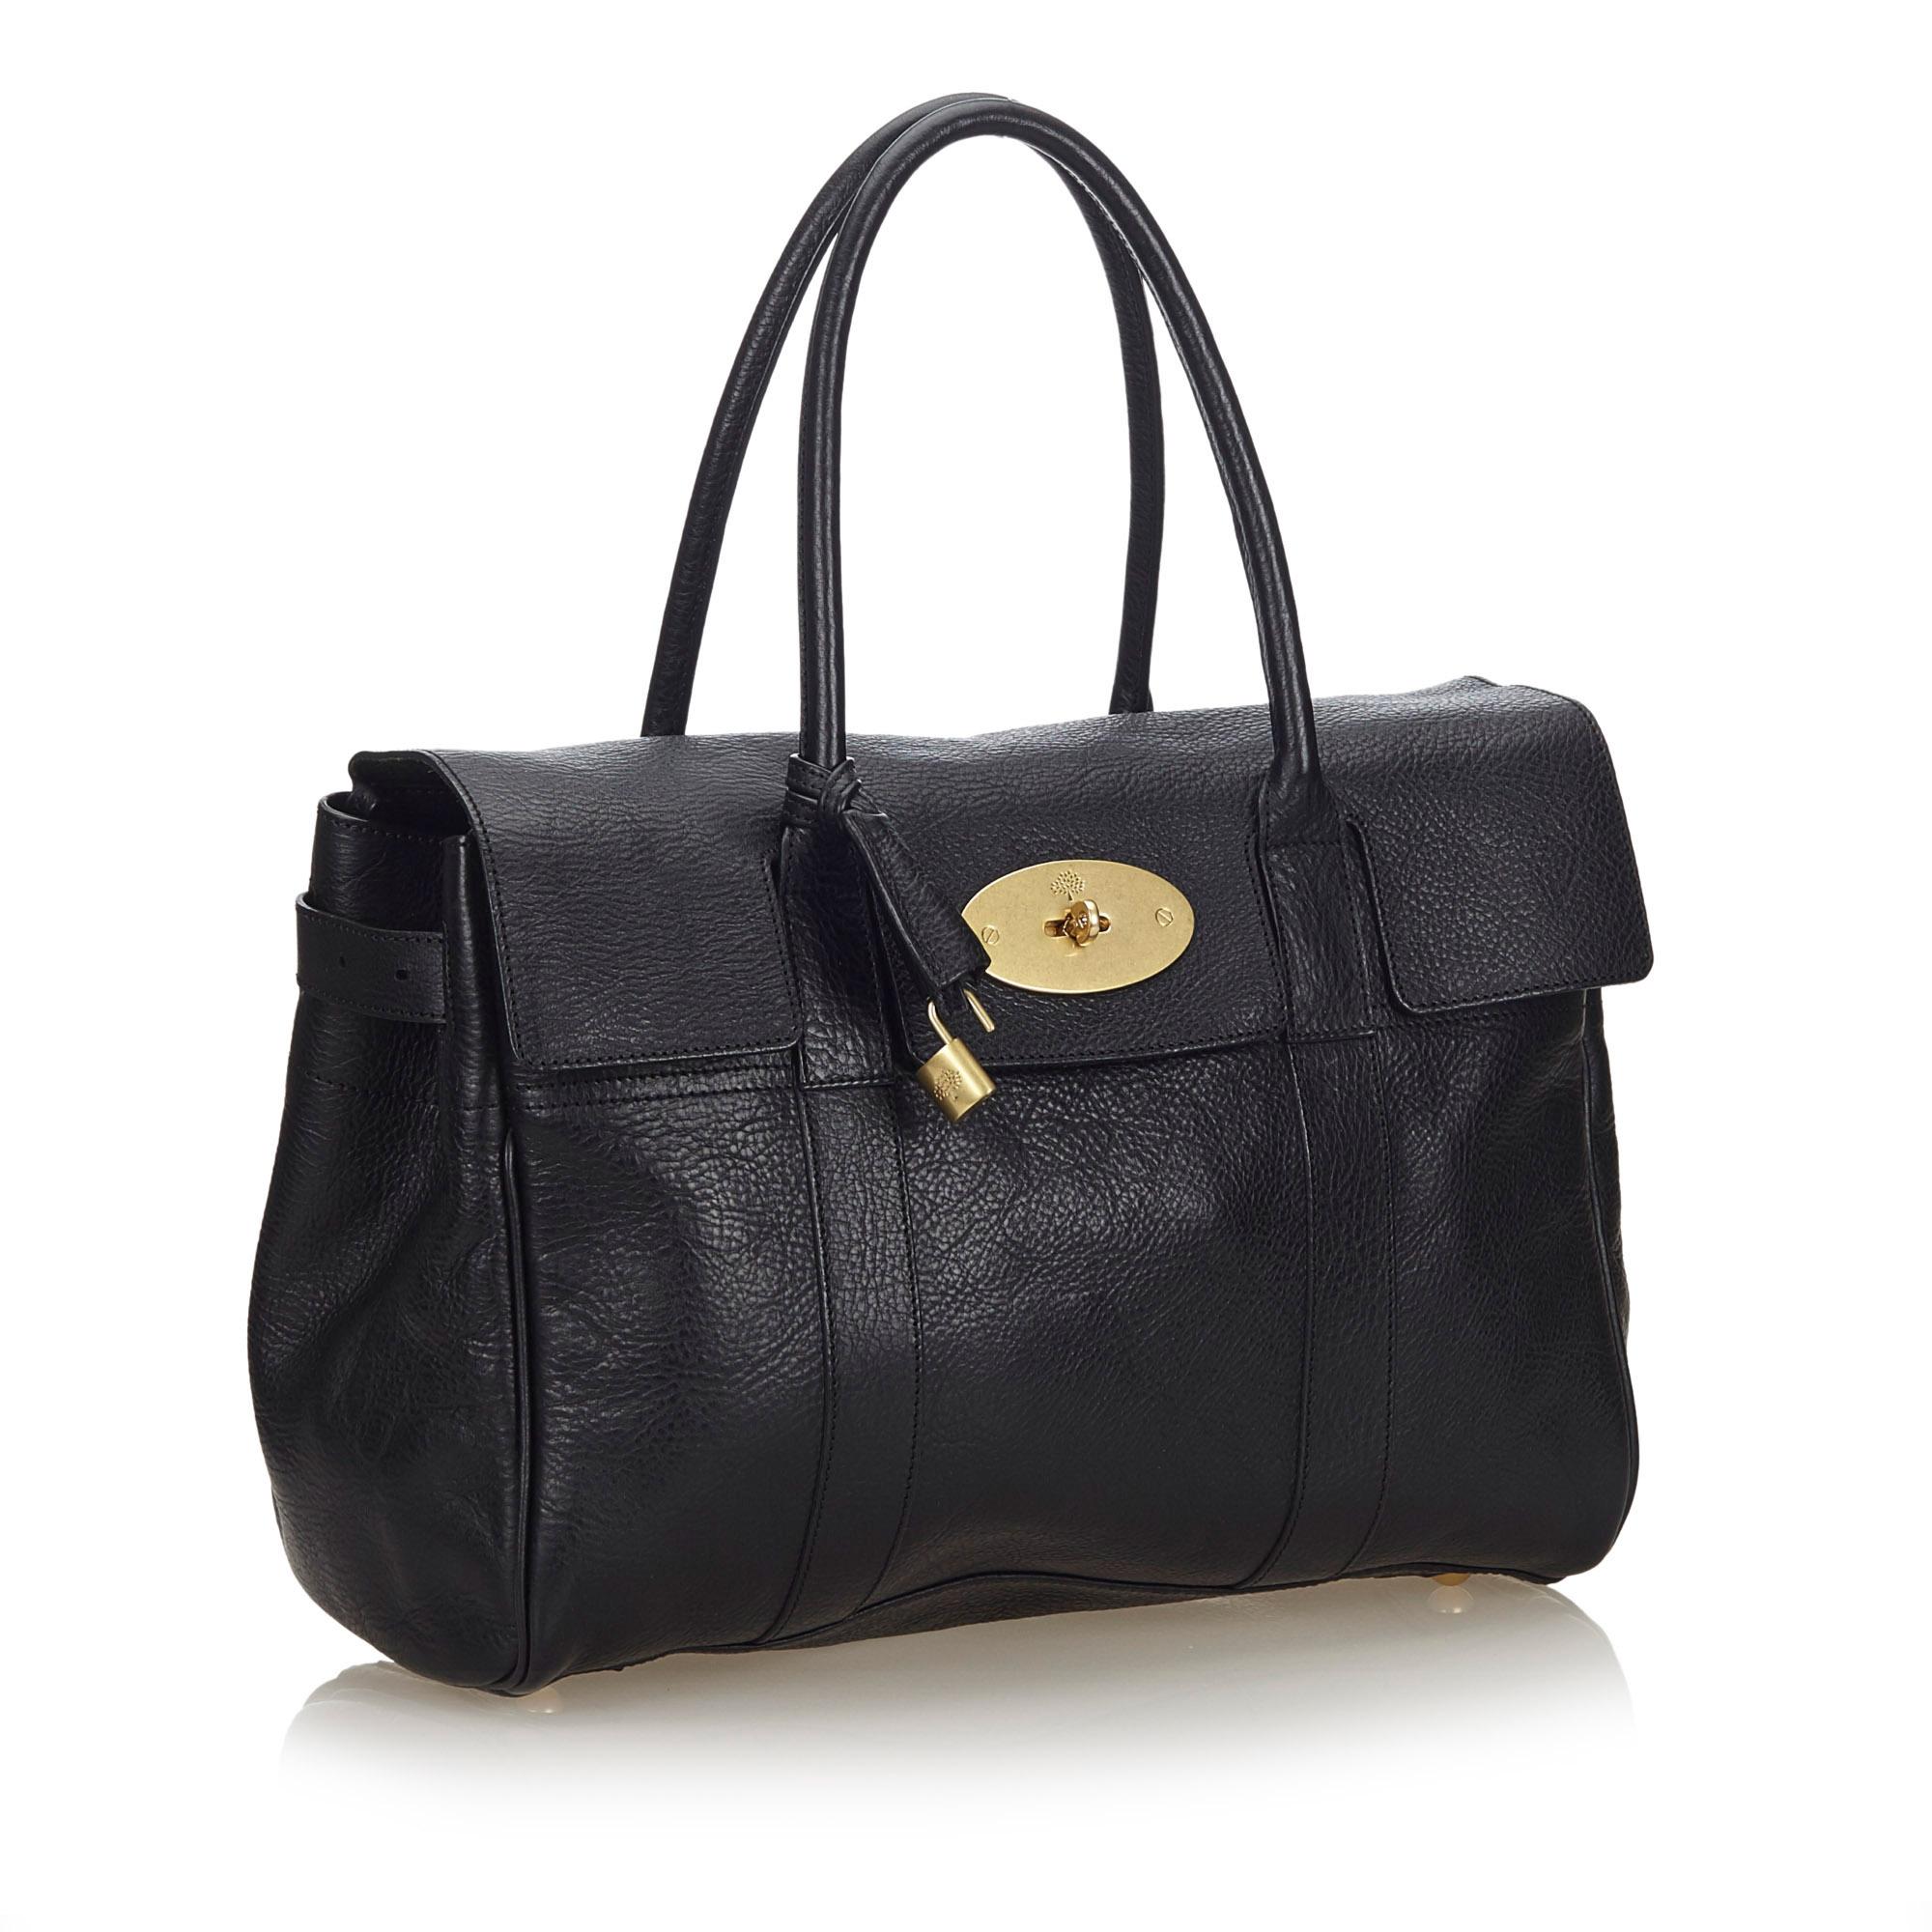 The Bayswater handbag features a leather body, rolled leather handles, a front flap with a twist lock closure, and interior zip and slip pockets. It carries as B+ condition rating.

Inclusions: 
Dust Bag
Padlock

Dimensions:
Length: 25.00 cm
Width: